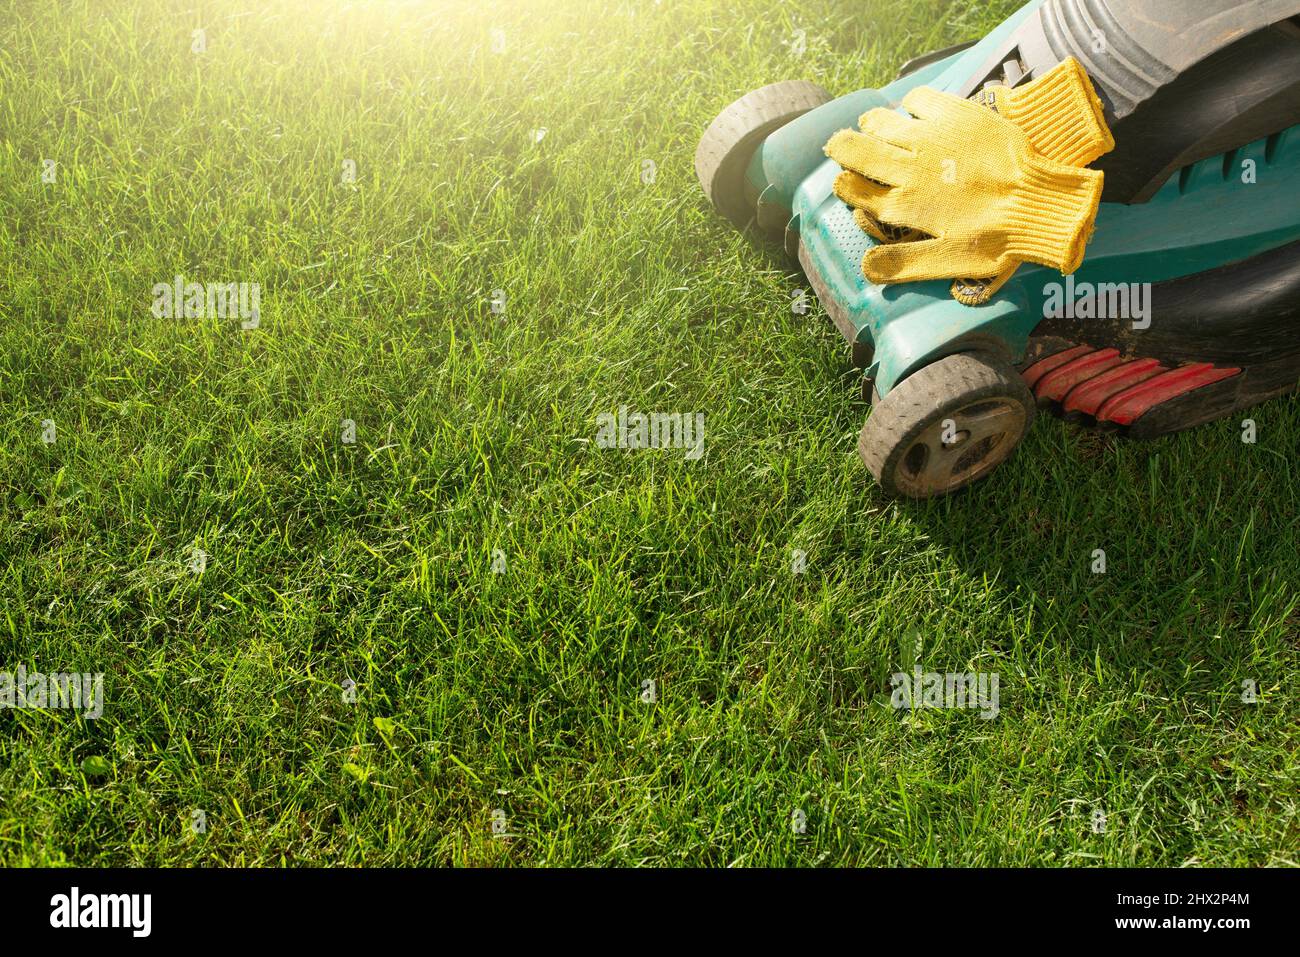 Lawn mower on grass closeup view. Lawn care concept. Stock Photo